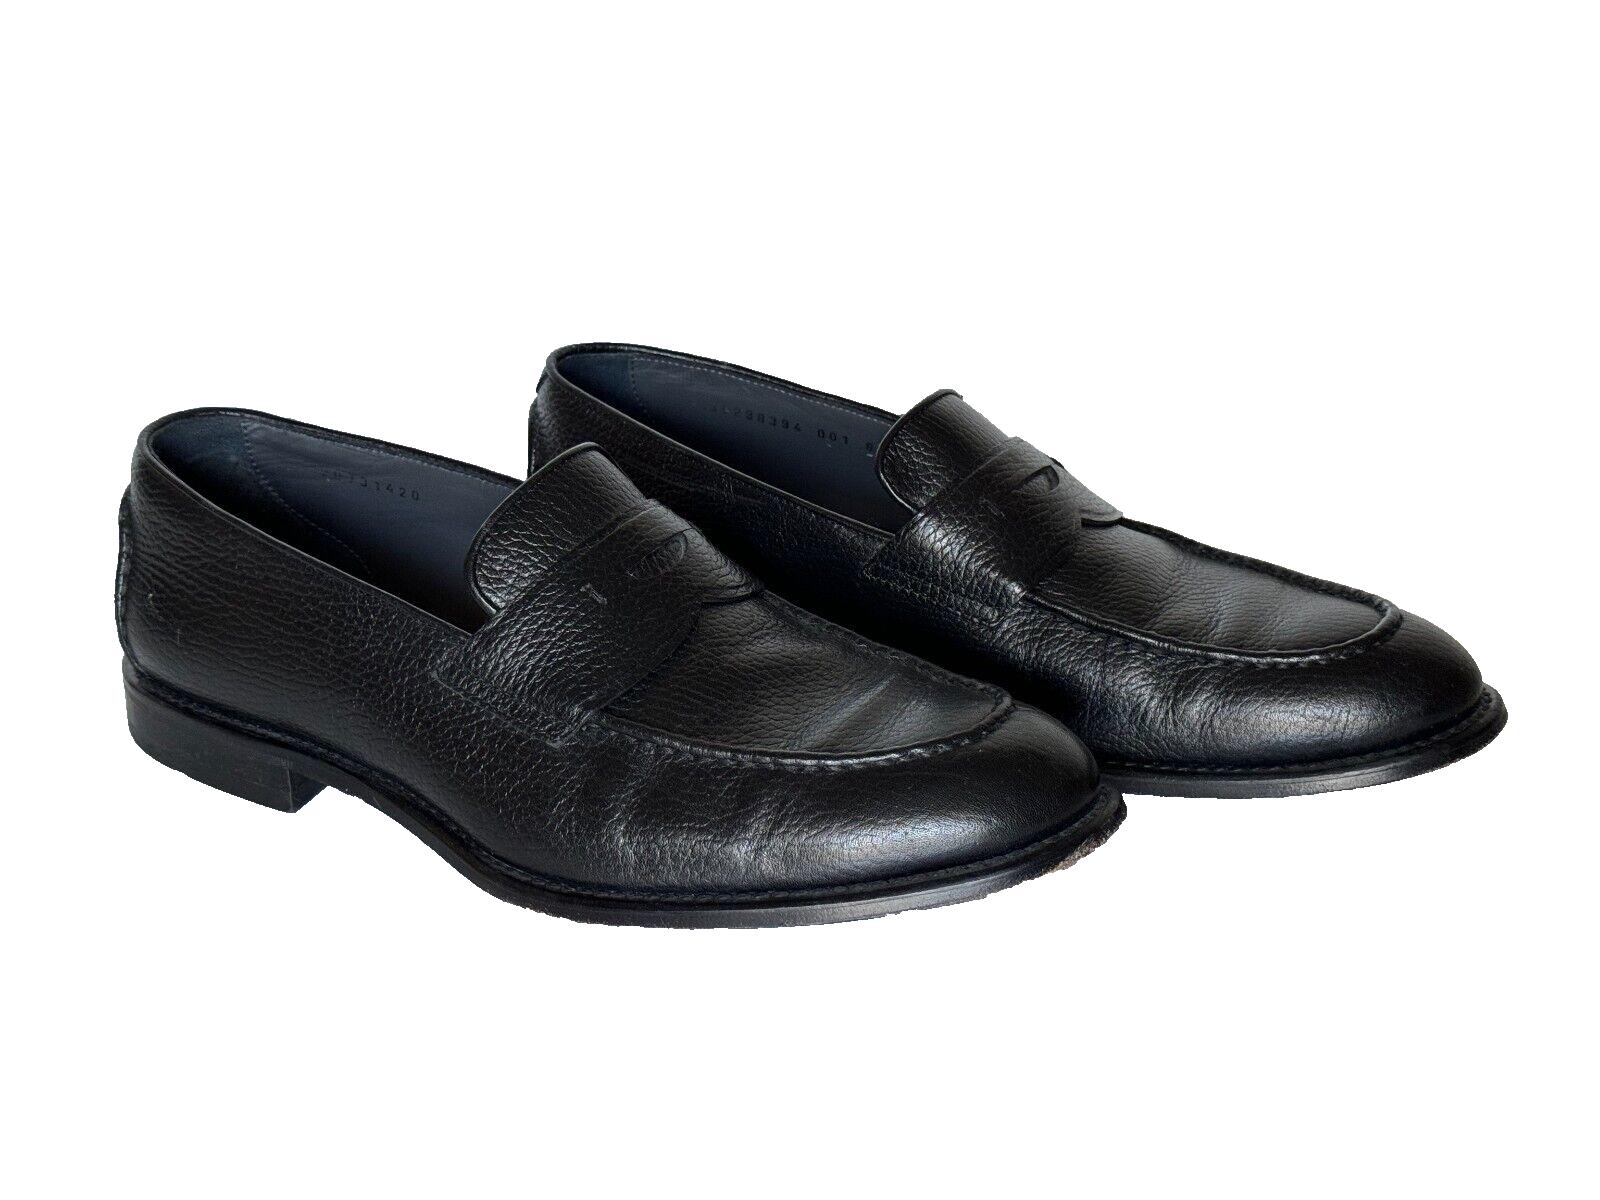 Boss Hugo Boss Men's Black Loafer Leather Shoes 9 US (8 IT) Made in Italy